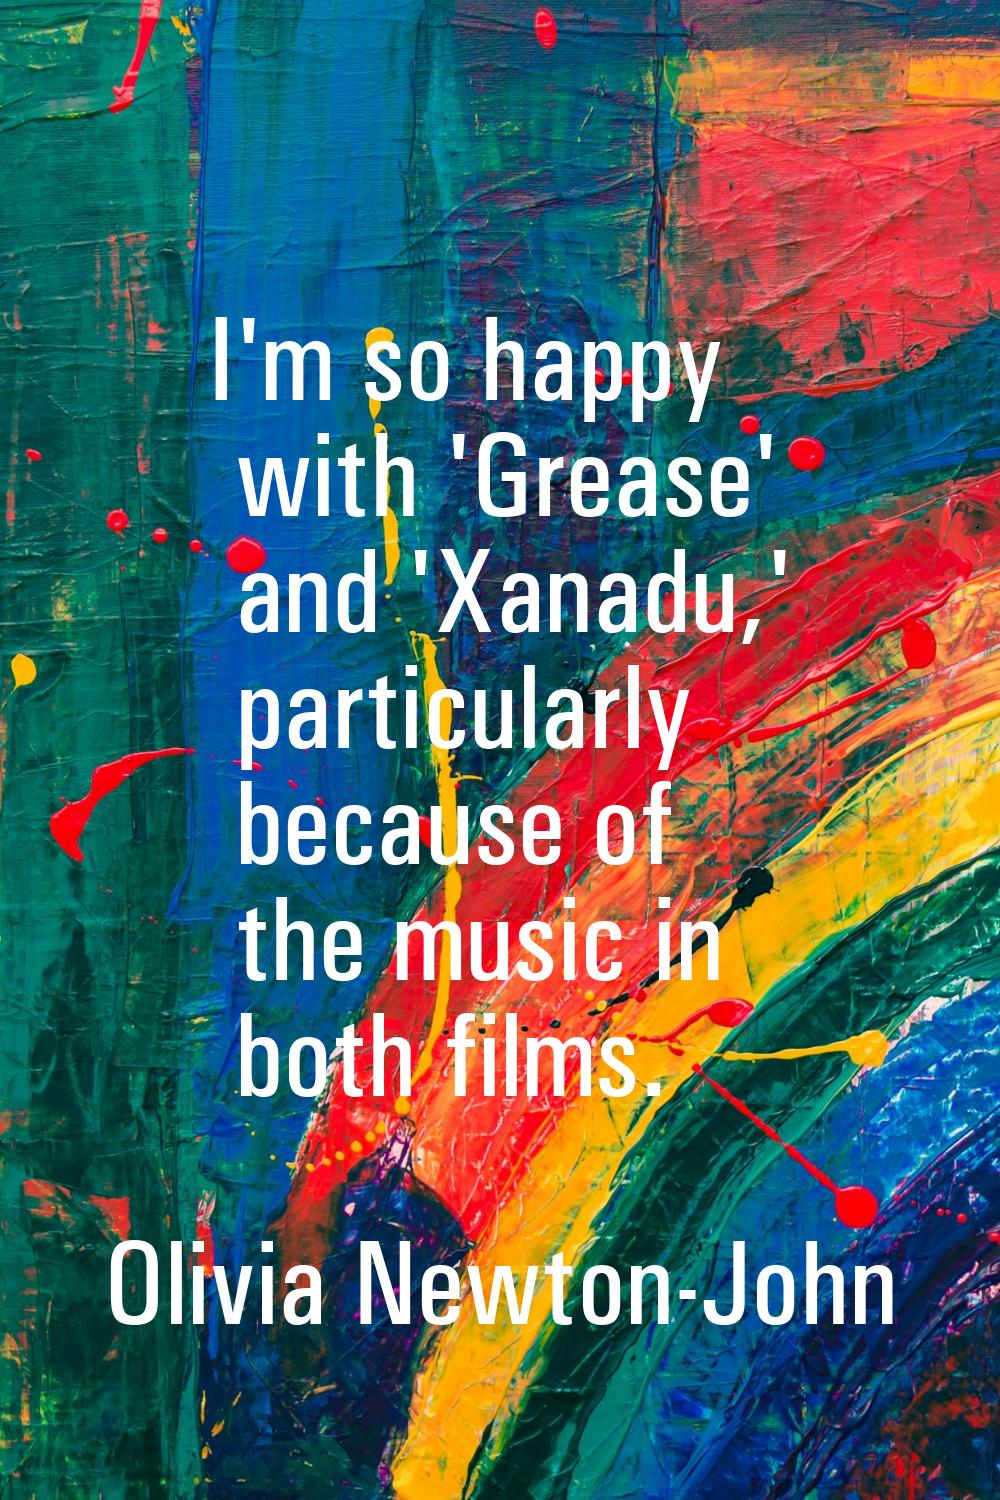 I'm so happy with 'Grease' and 'Xanadu,' particularly because of the music in both films.